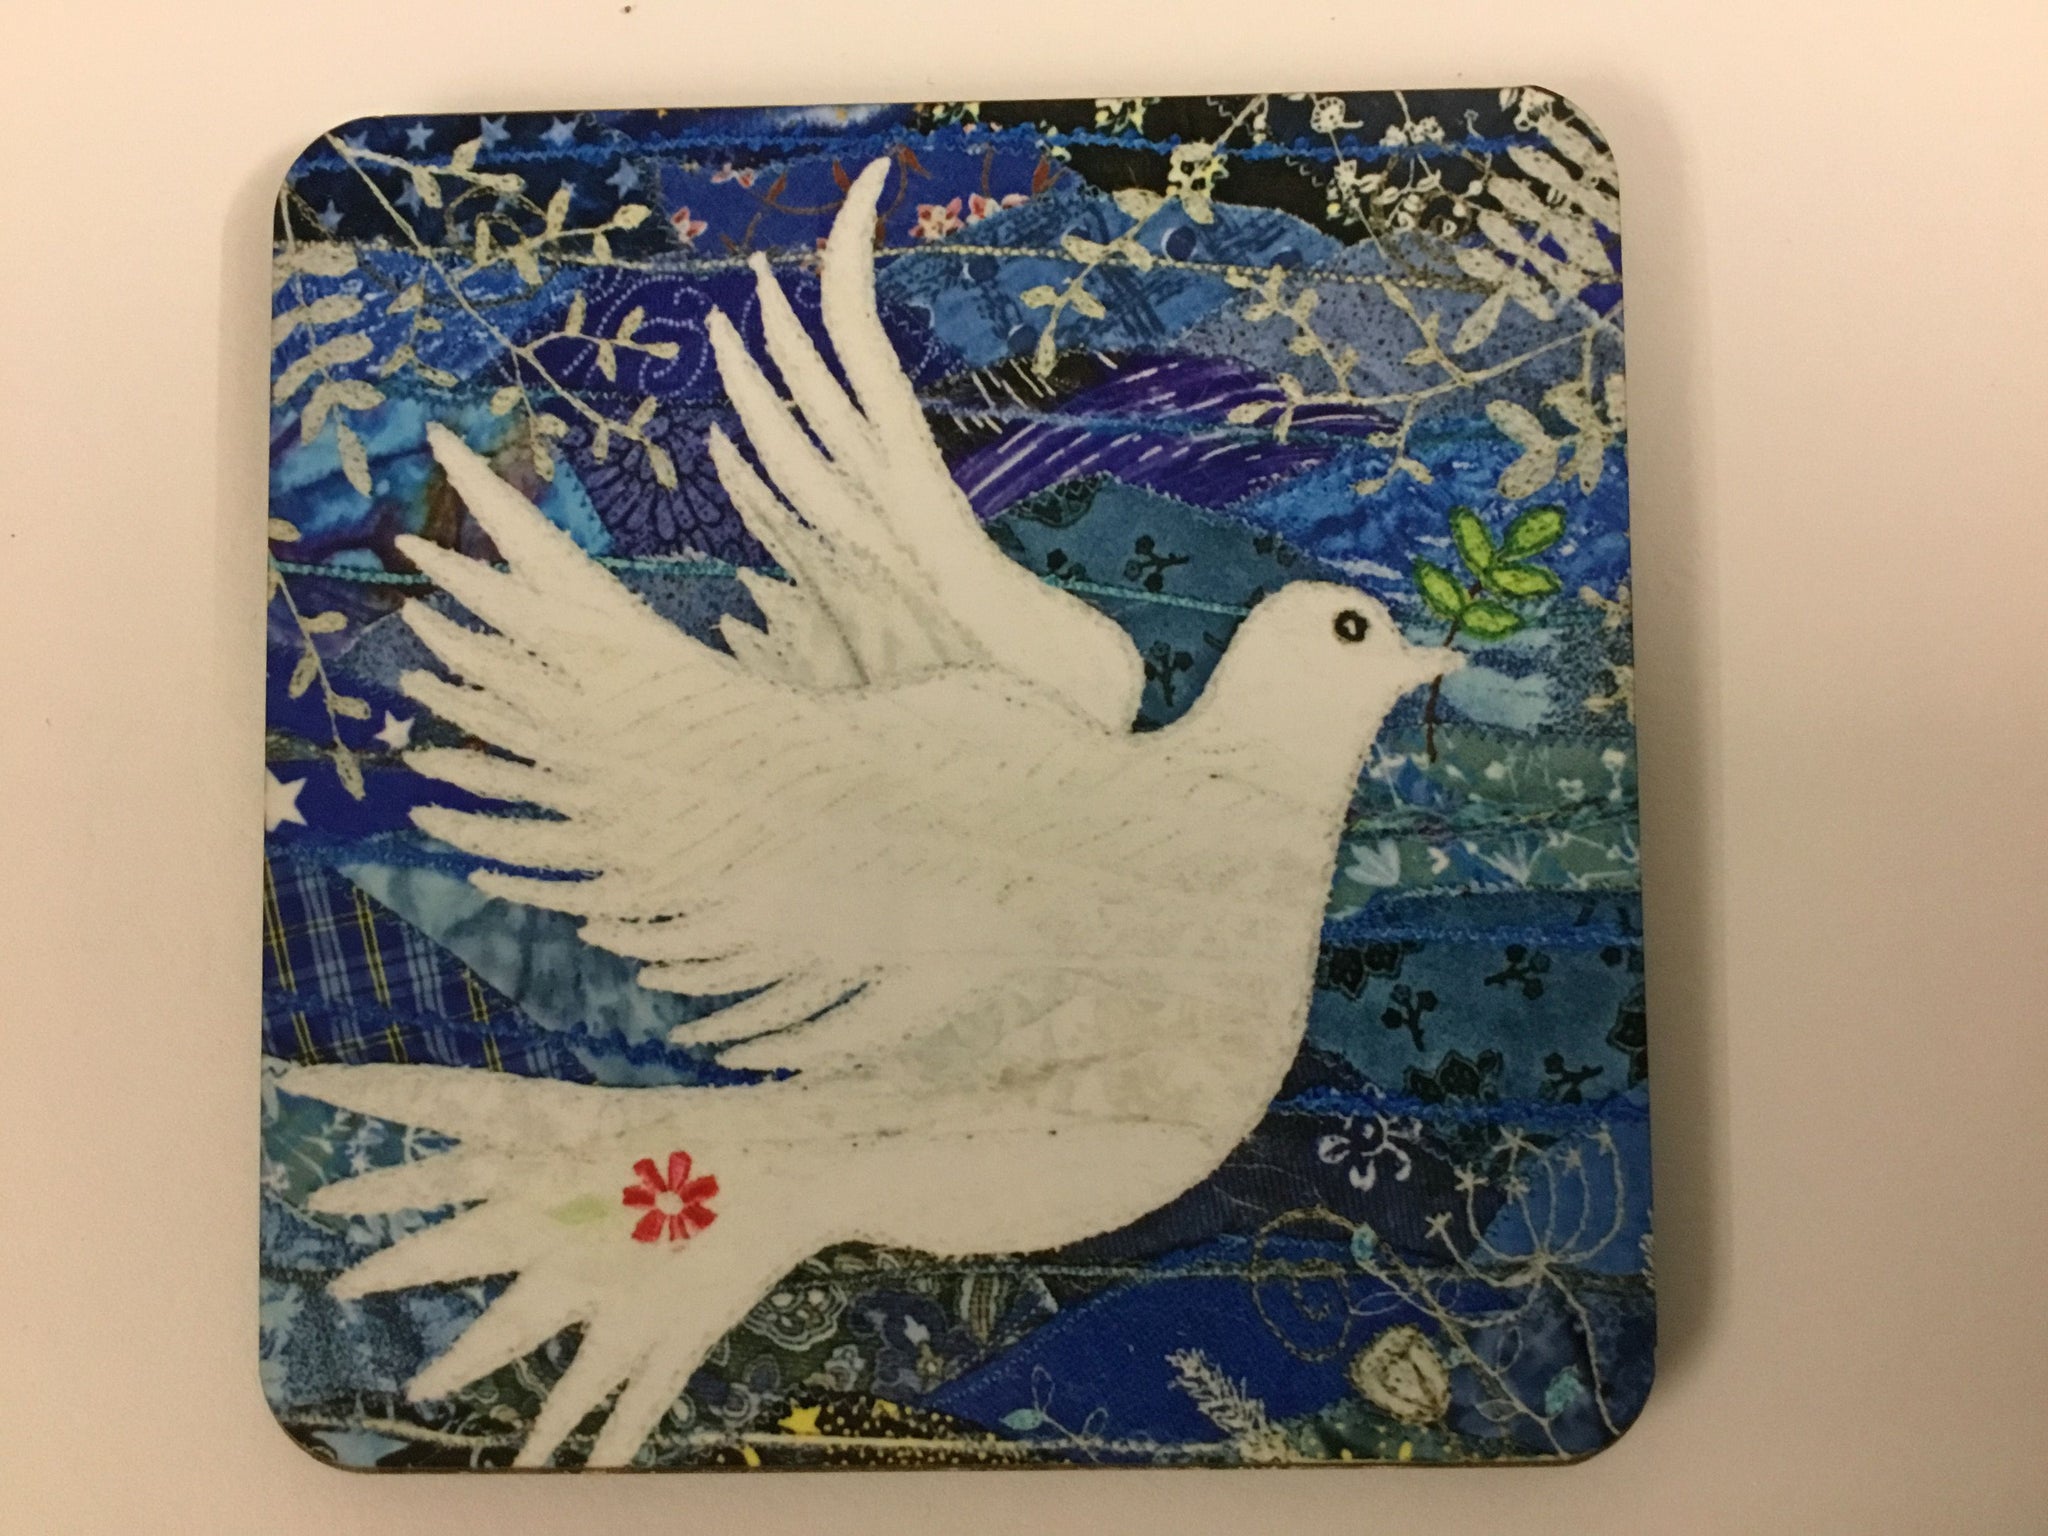 Cork-backed coaster 'The Dove' by Josie Russell